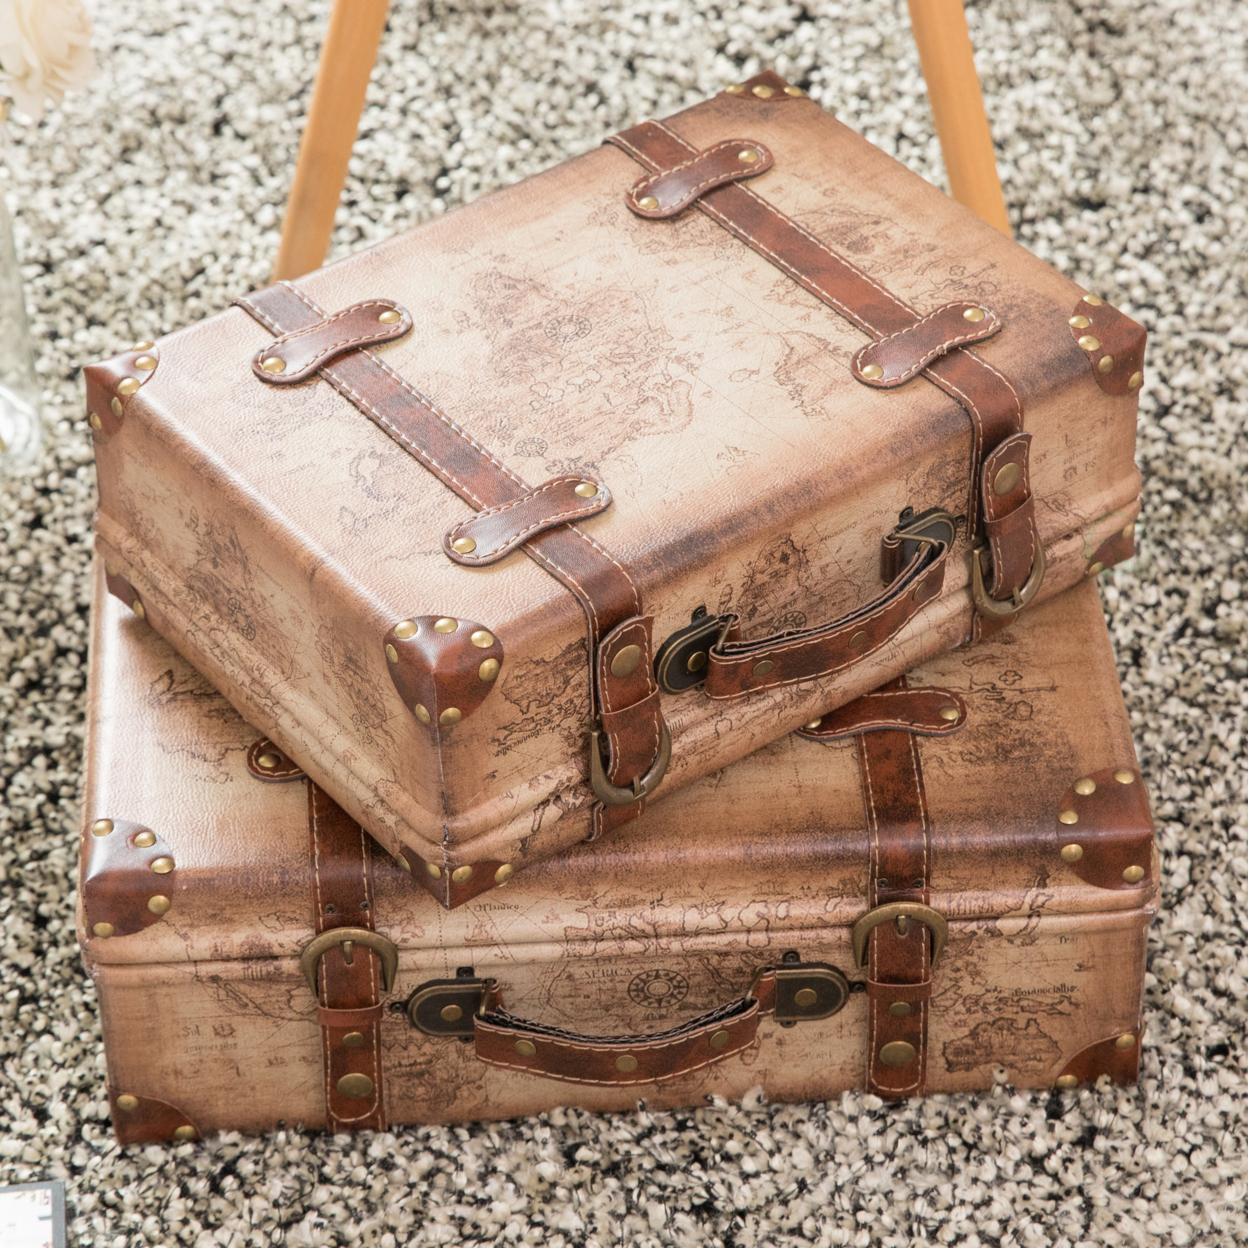 Set of 2 Vintage-Style World Map Leather Suitcase Trunks with Straps and Handle - image 1 of 6